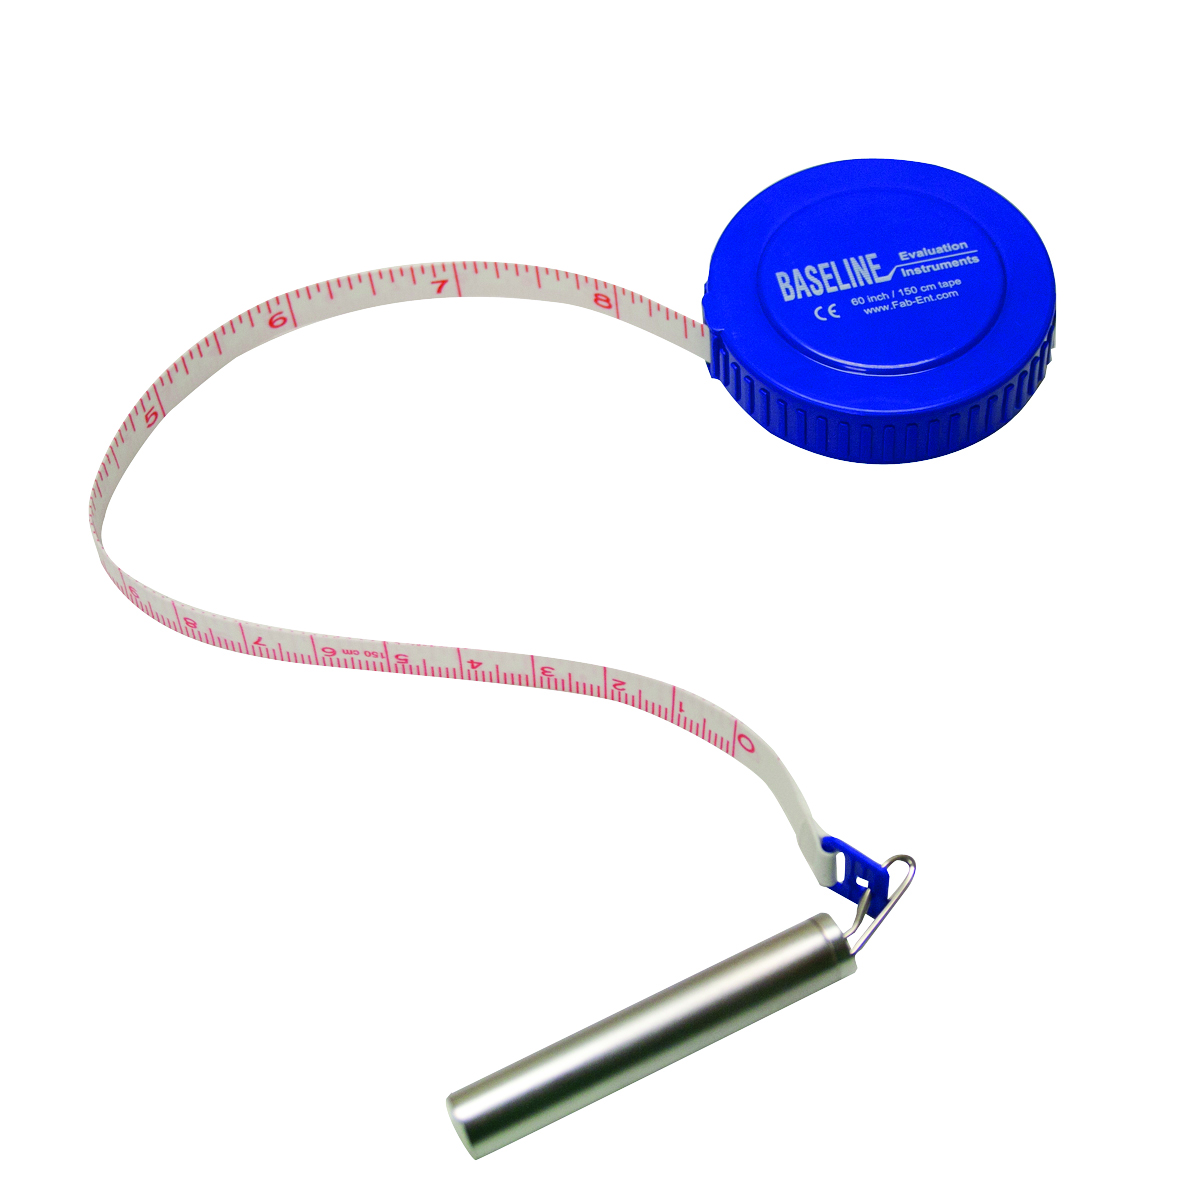 Picture of Baseline 12-1203 72 in. Measurement Tape with Gulick Attachment